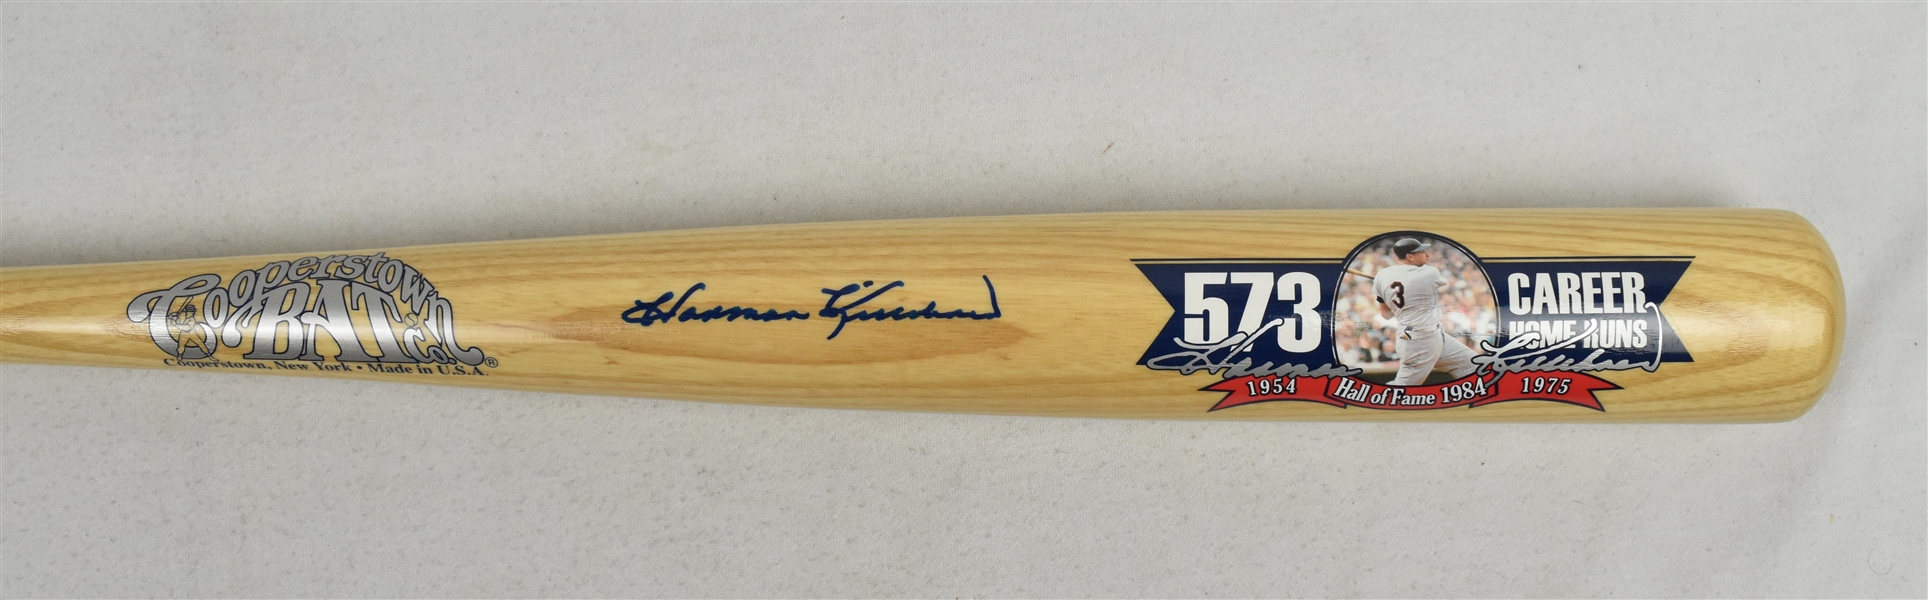 Harmon Killebrew Autographed Limited Edition Cooperstown Collection HR #392 Bat